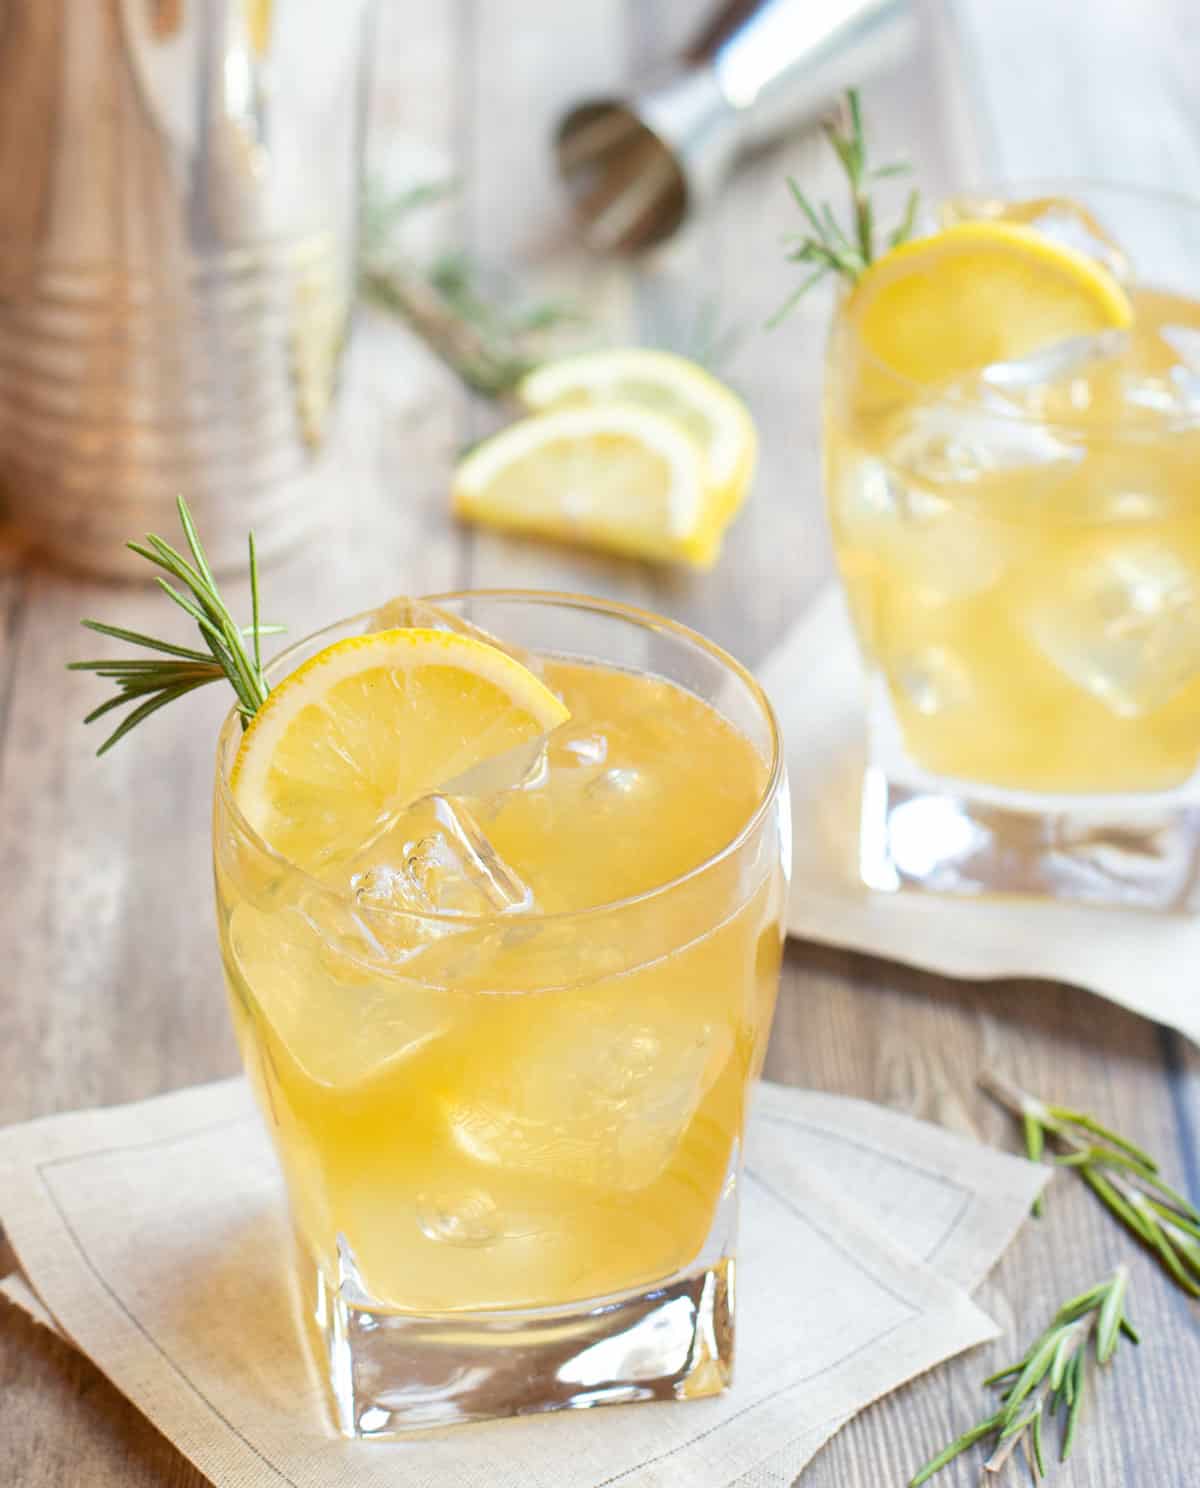 Lemon Ginger Bourbon Cocktail in a glass with a slice of lemon